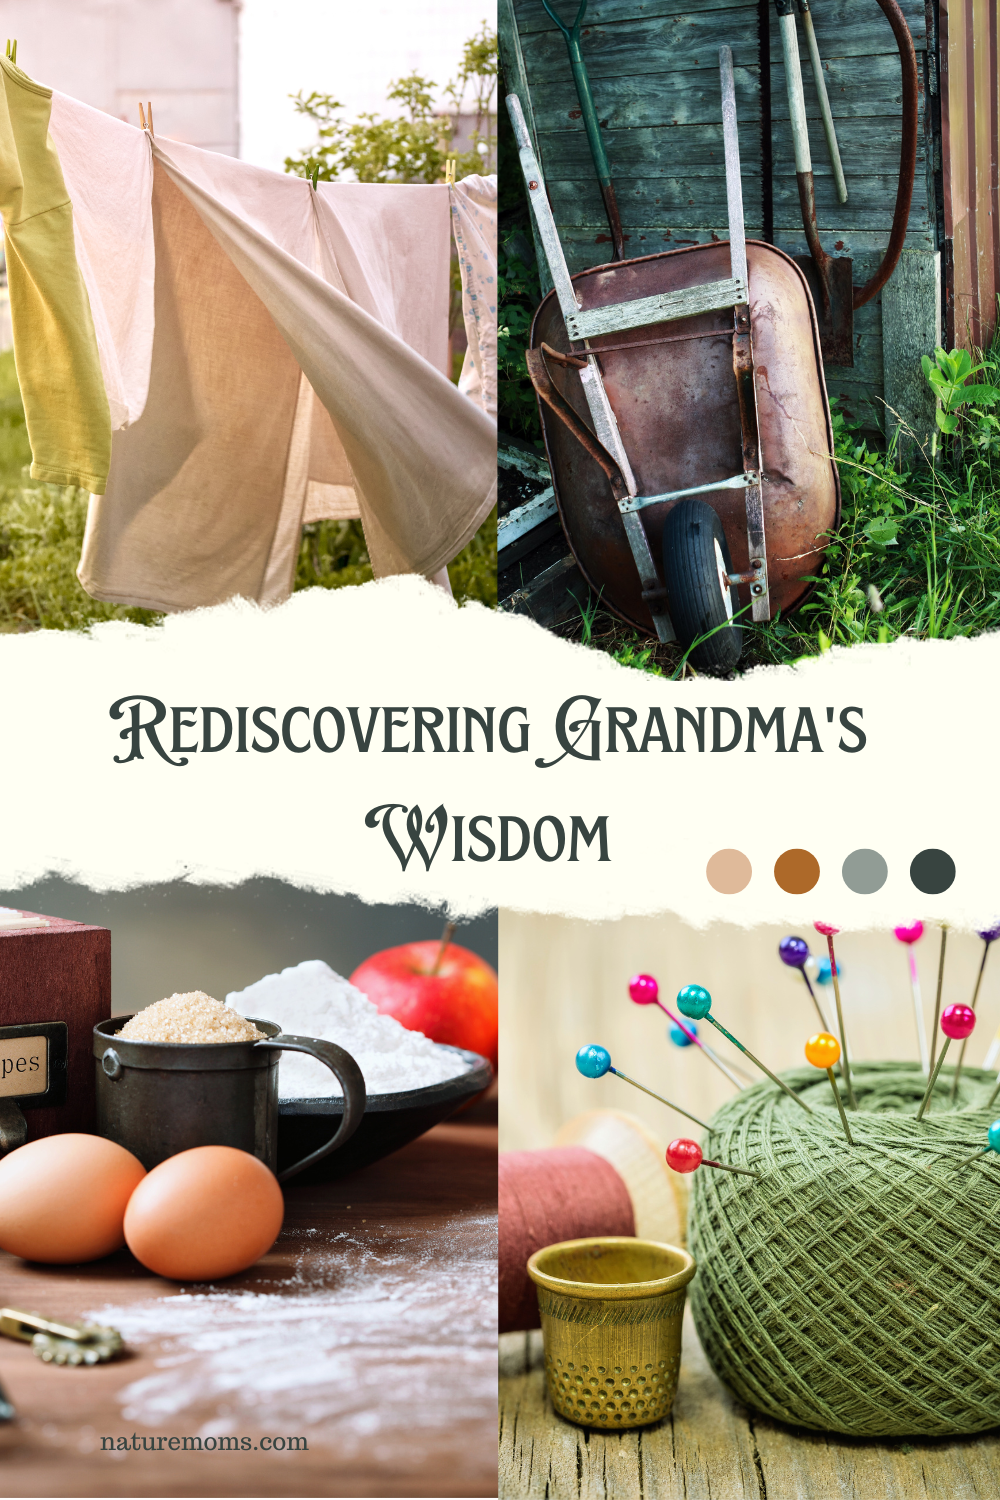 Rediscovering Grandma's Wisdom: 10 Old-Fashioned Frugal Living Tips and Ideas